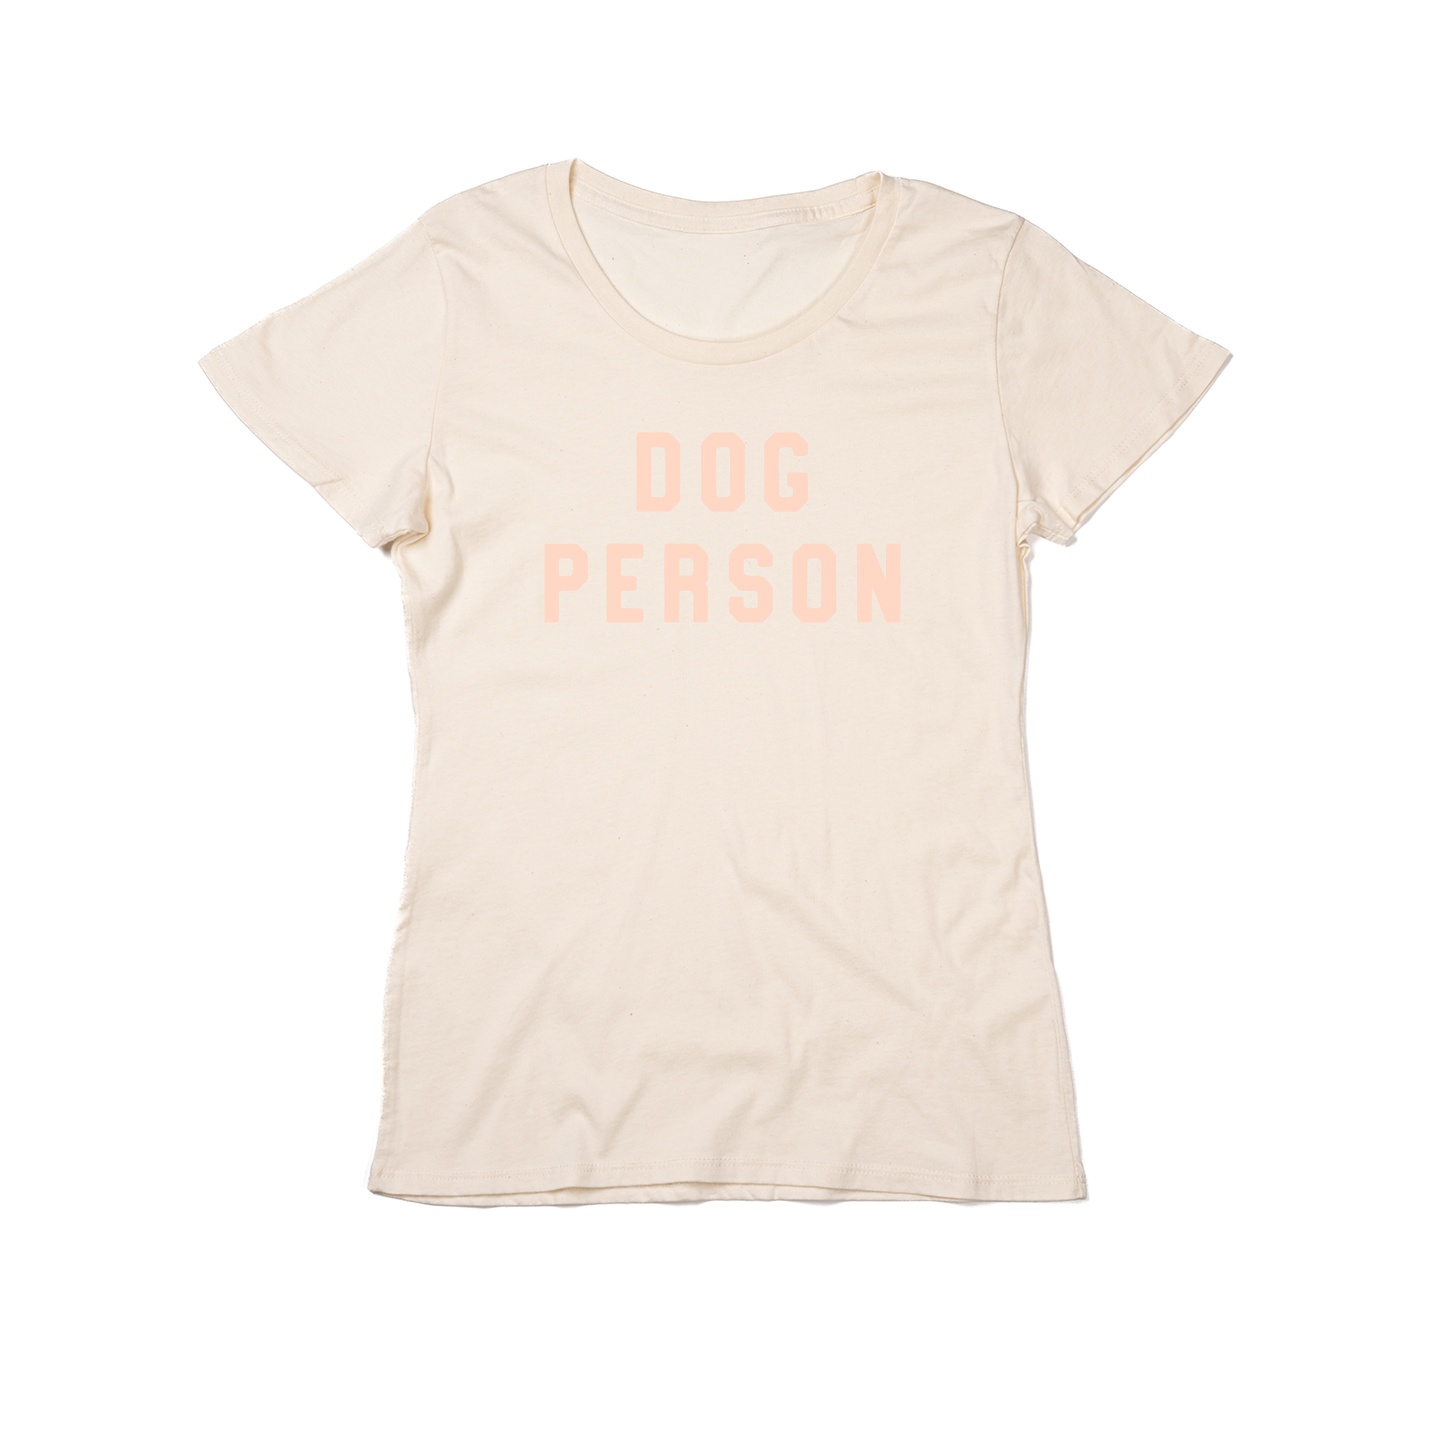 Dog Person (Peach) - Women's Fitted Tee (Natural)